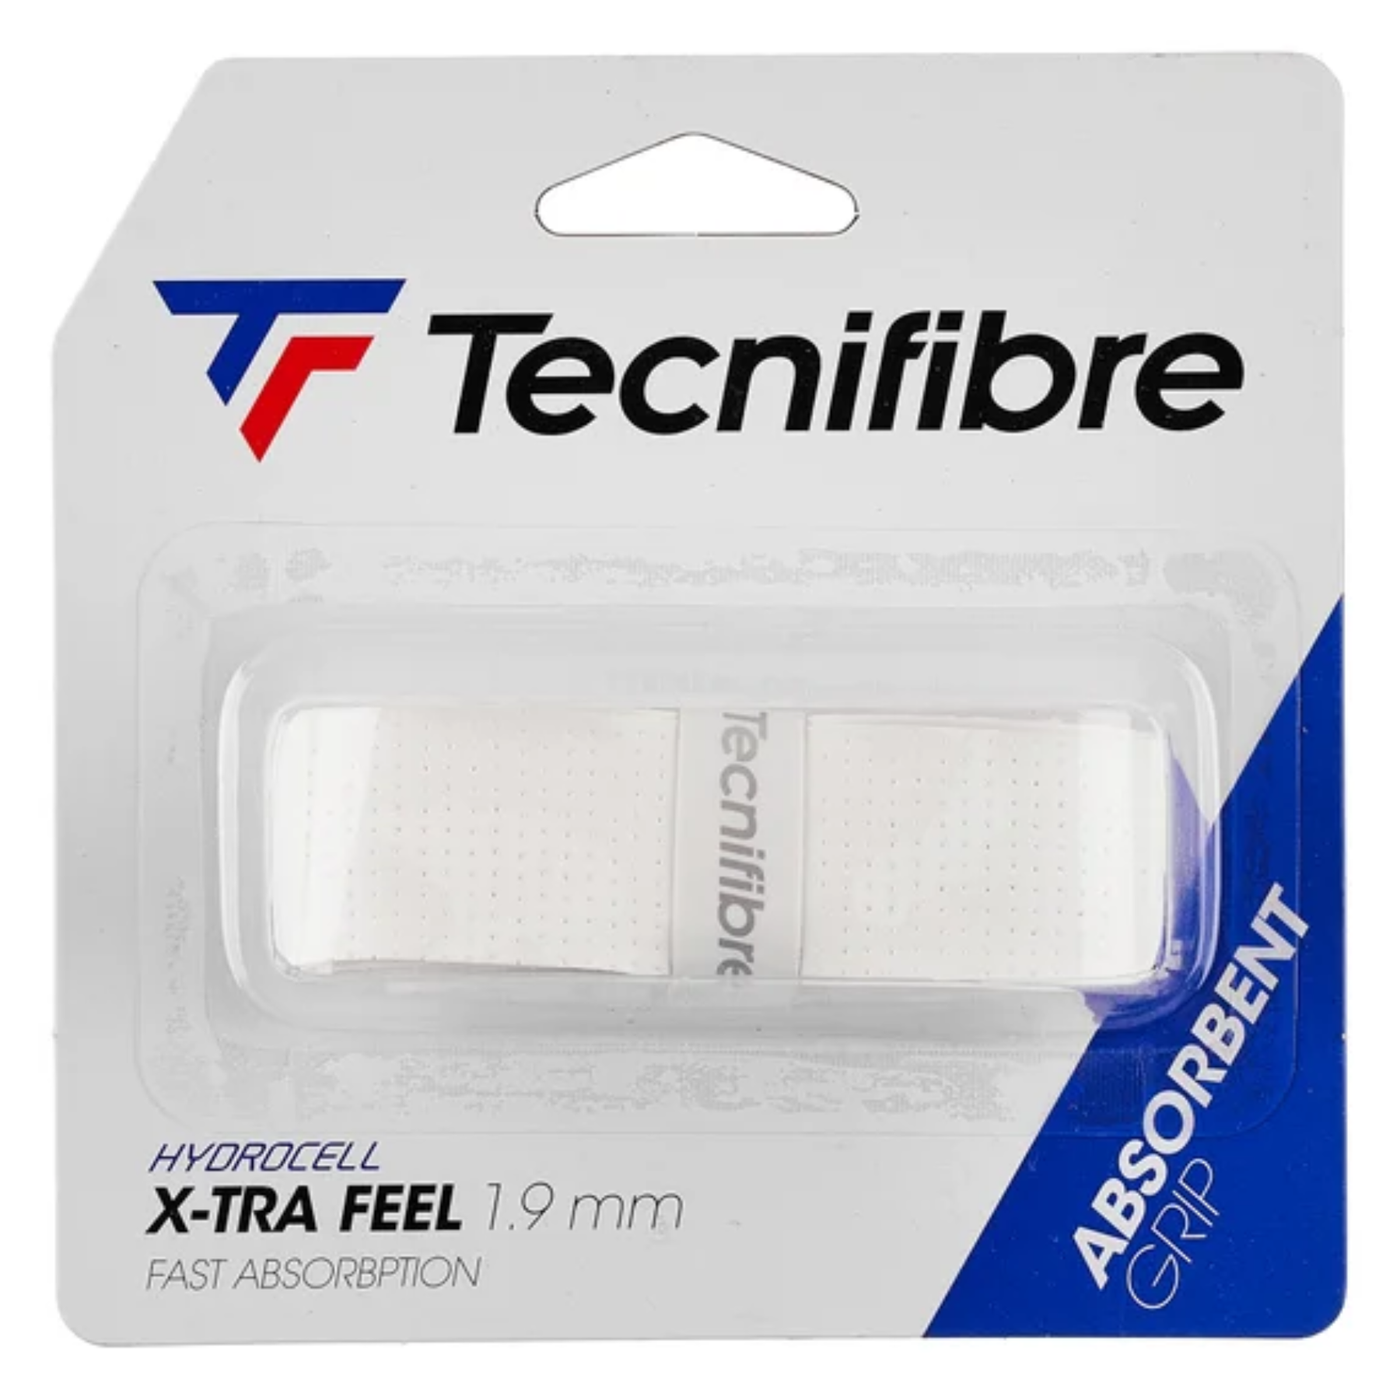 Tecnifibre ATP X-Tra Feel Replacement Grip - White